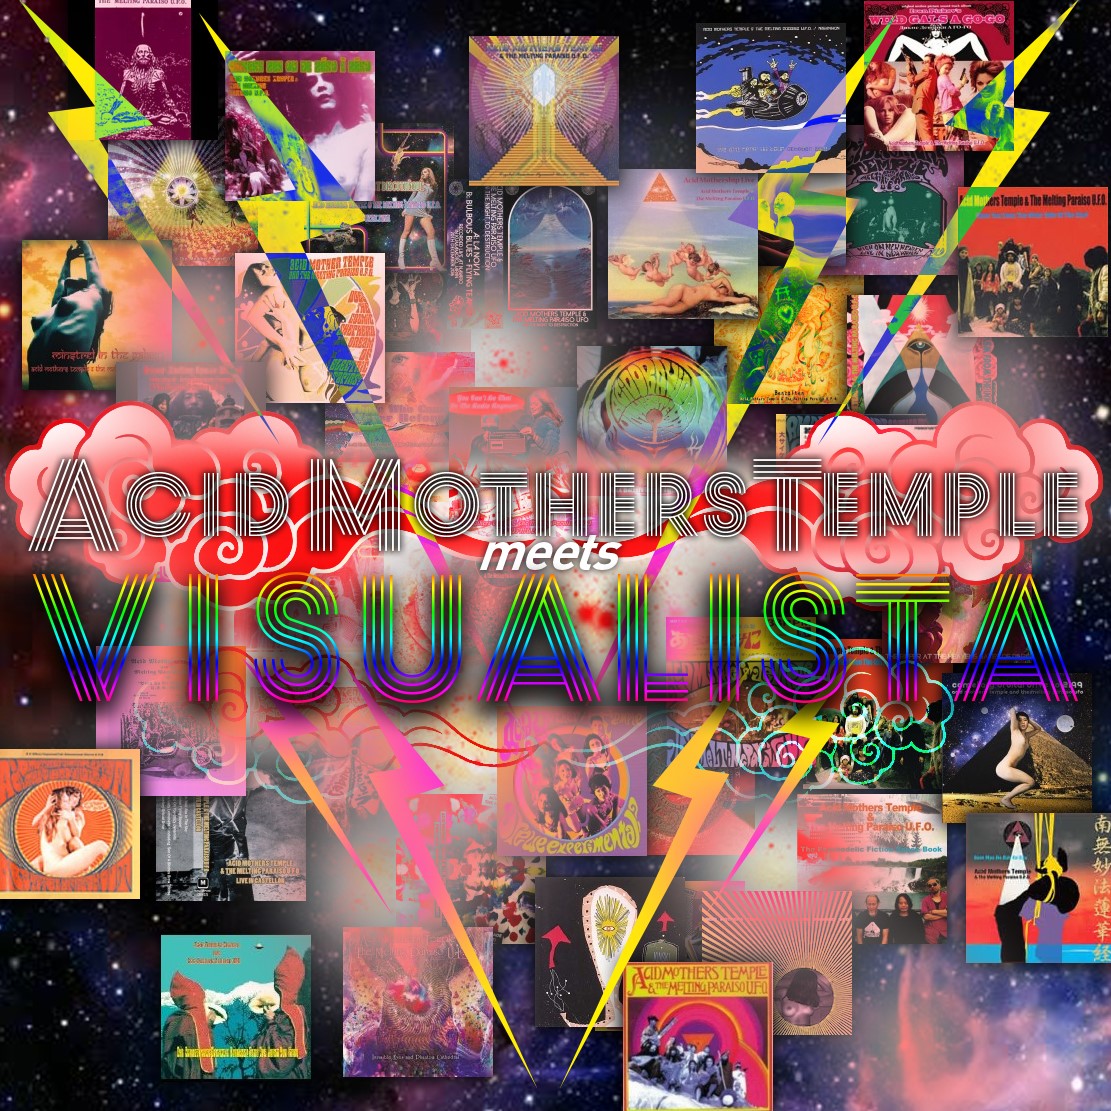 We need your visual works from all over the world. C'mon, VISUALISTA!What is Acid Mothers Temple meets VISUALISTA? http://acidmothers.com/acid-mothers-temple-meets-visualista.htmlAcid Mothers Temple Youtube Channel(subscribe to our channel) https://www.youtube.com/channel/UCeRTV_iOE_loRiMciVwur-w